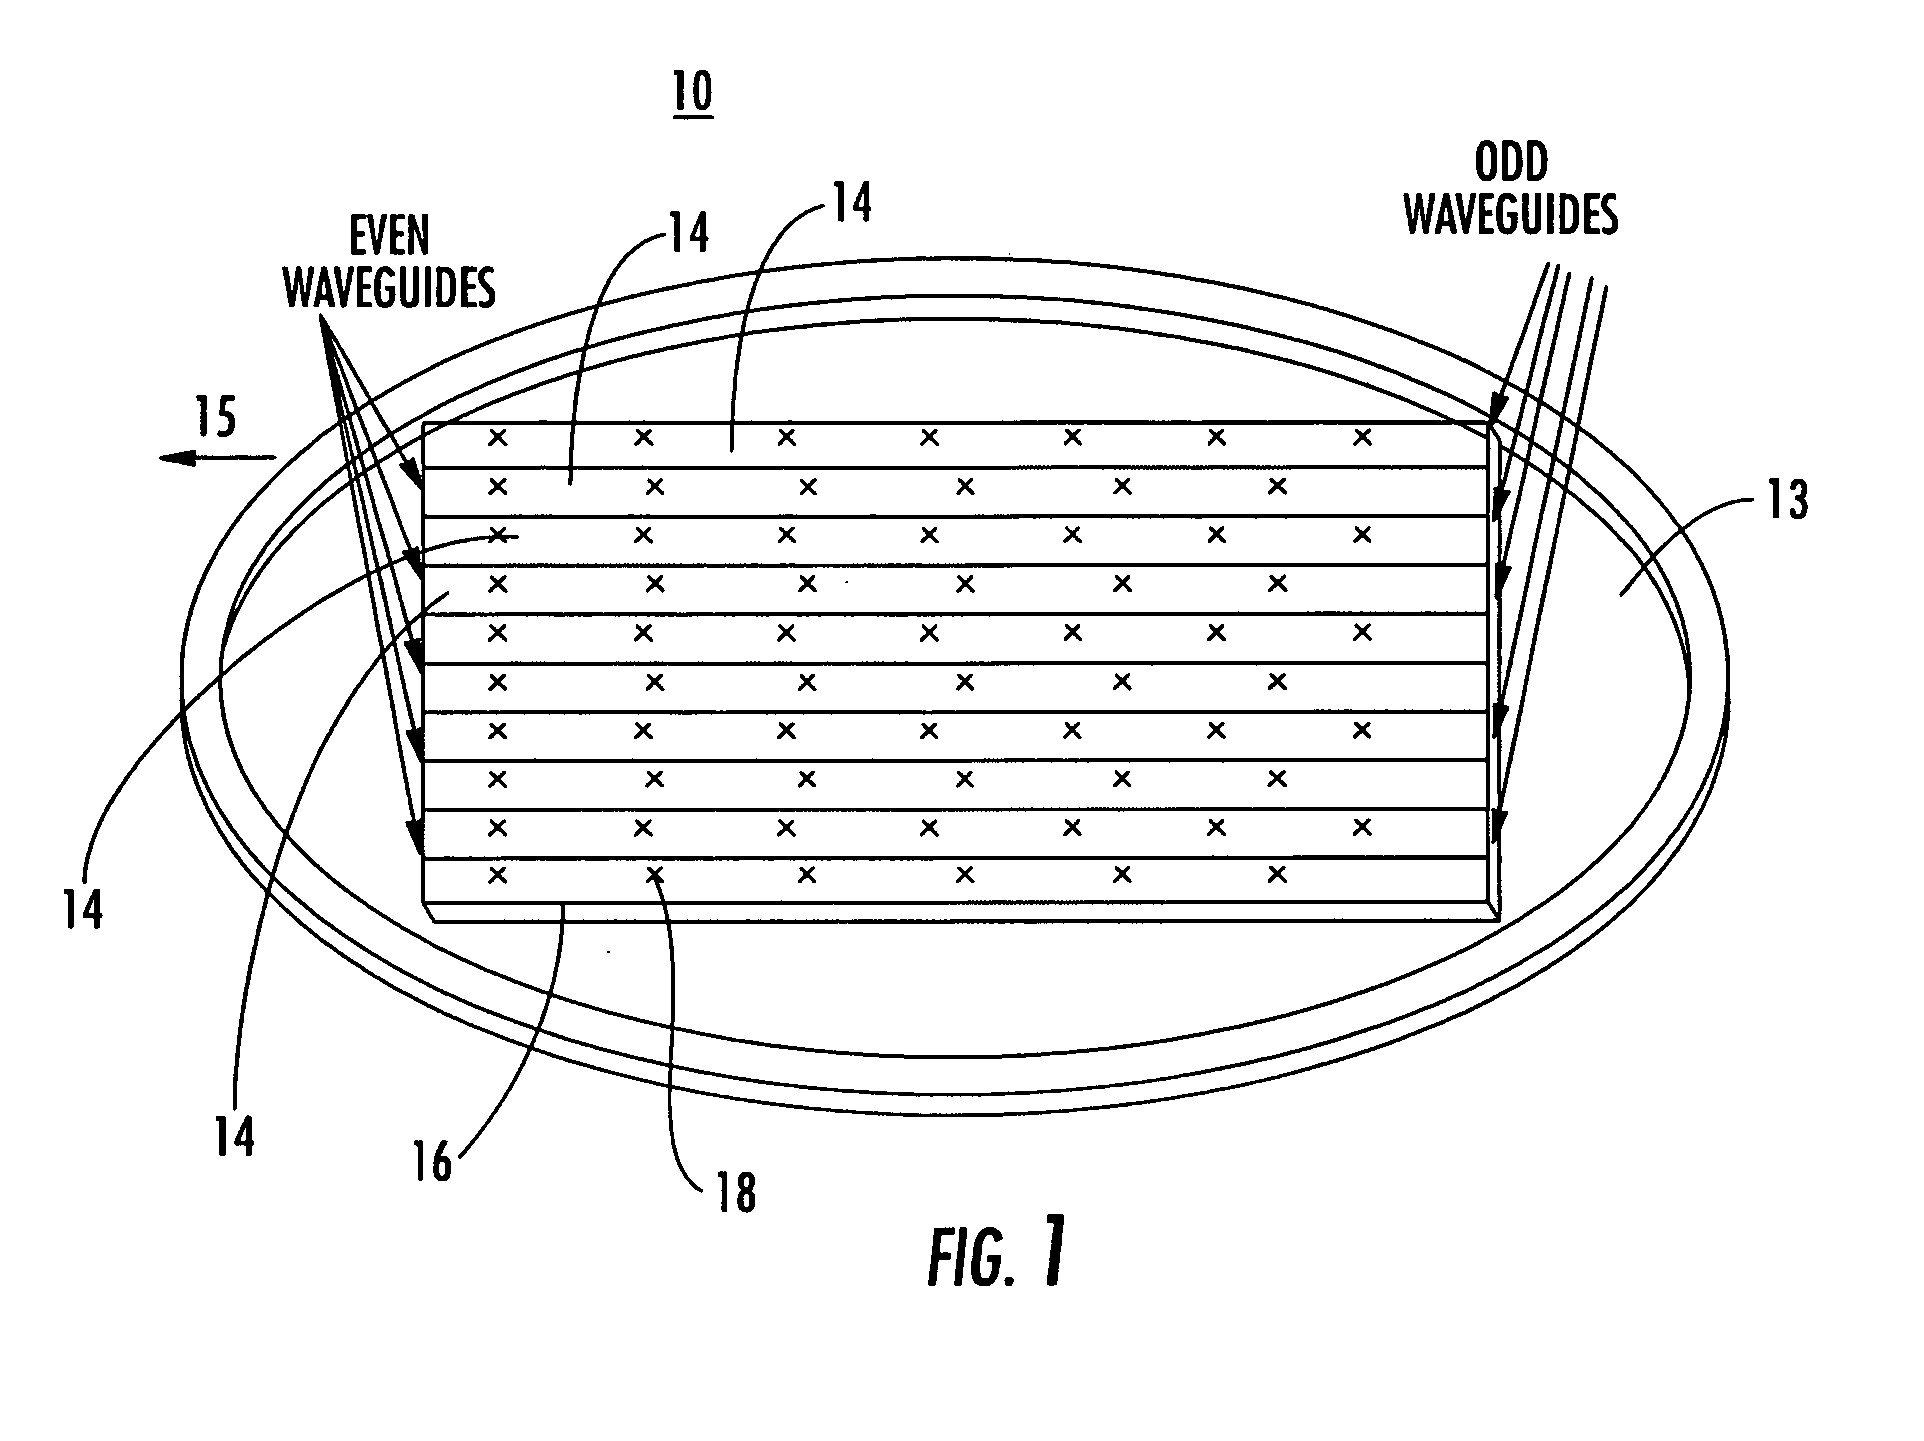 Vehicle mounted satellite antenna system with in-motion tracking using beam forming